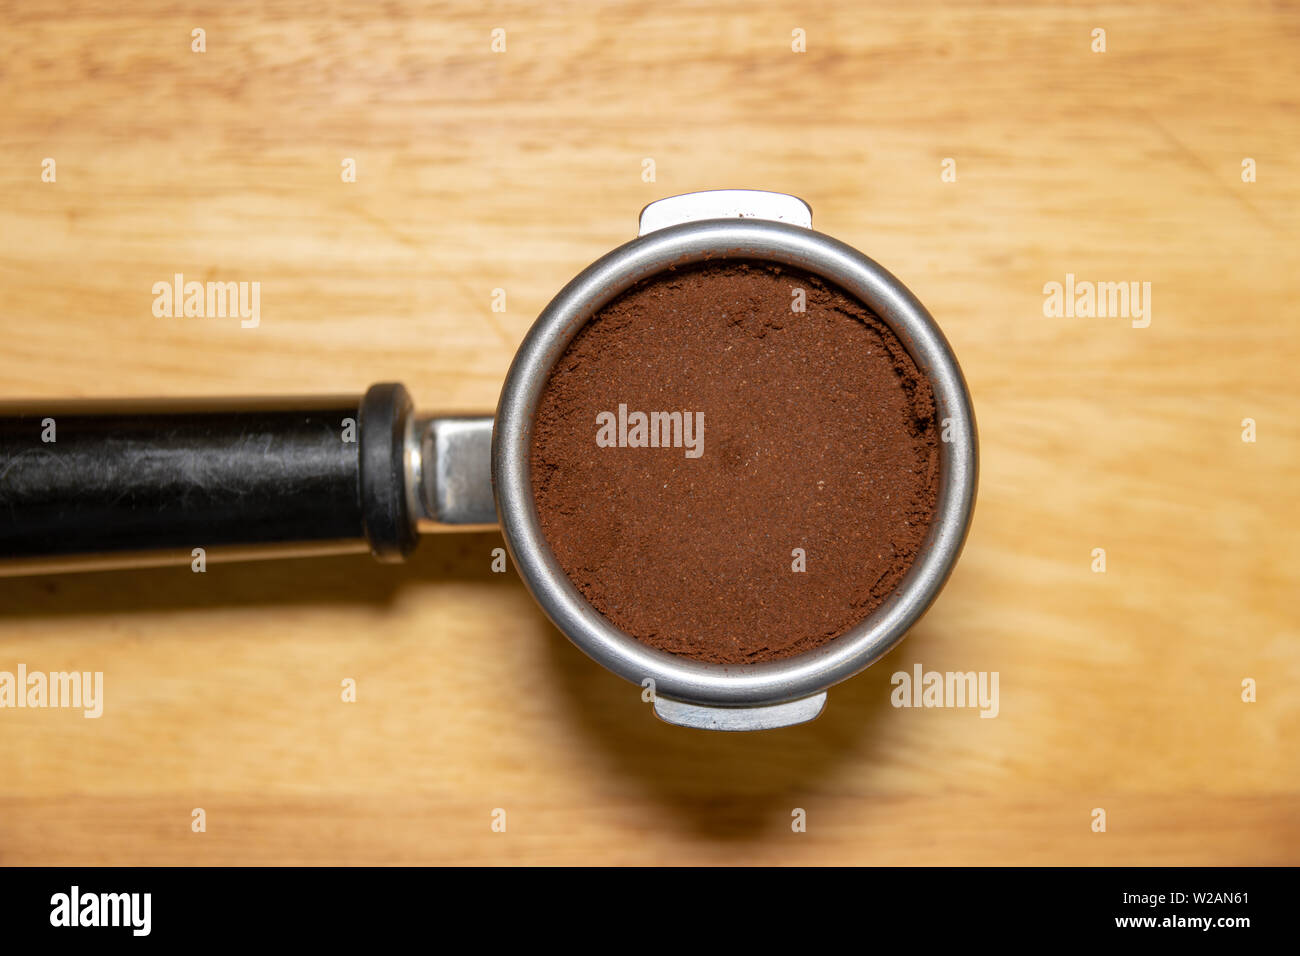 Portafilter on table filled with ground coffee Stock Photo